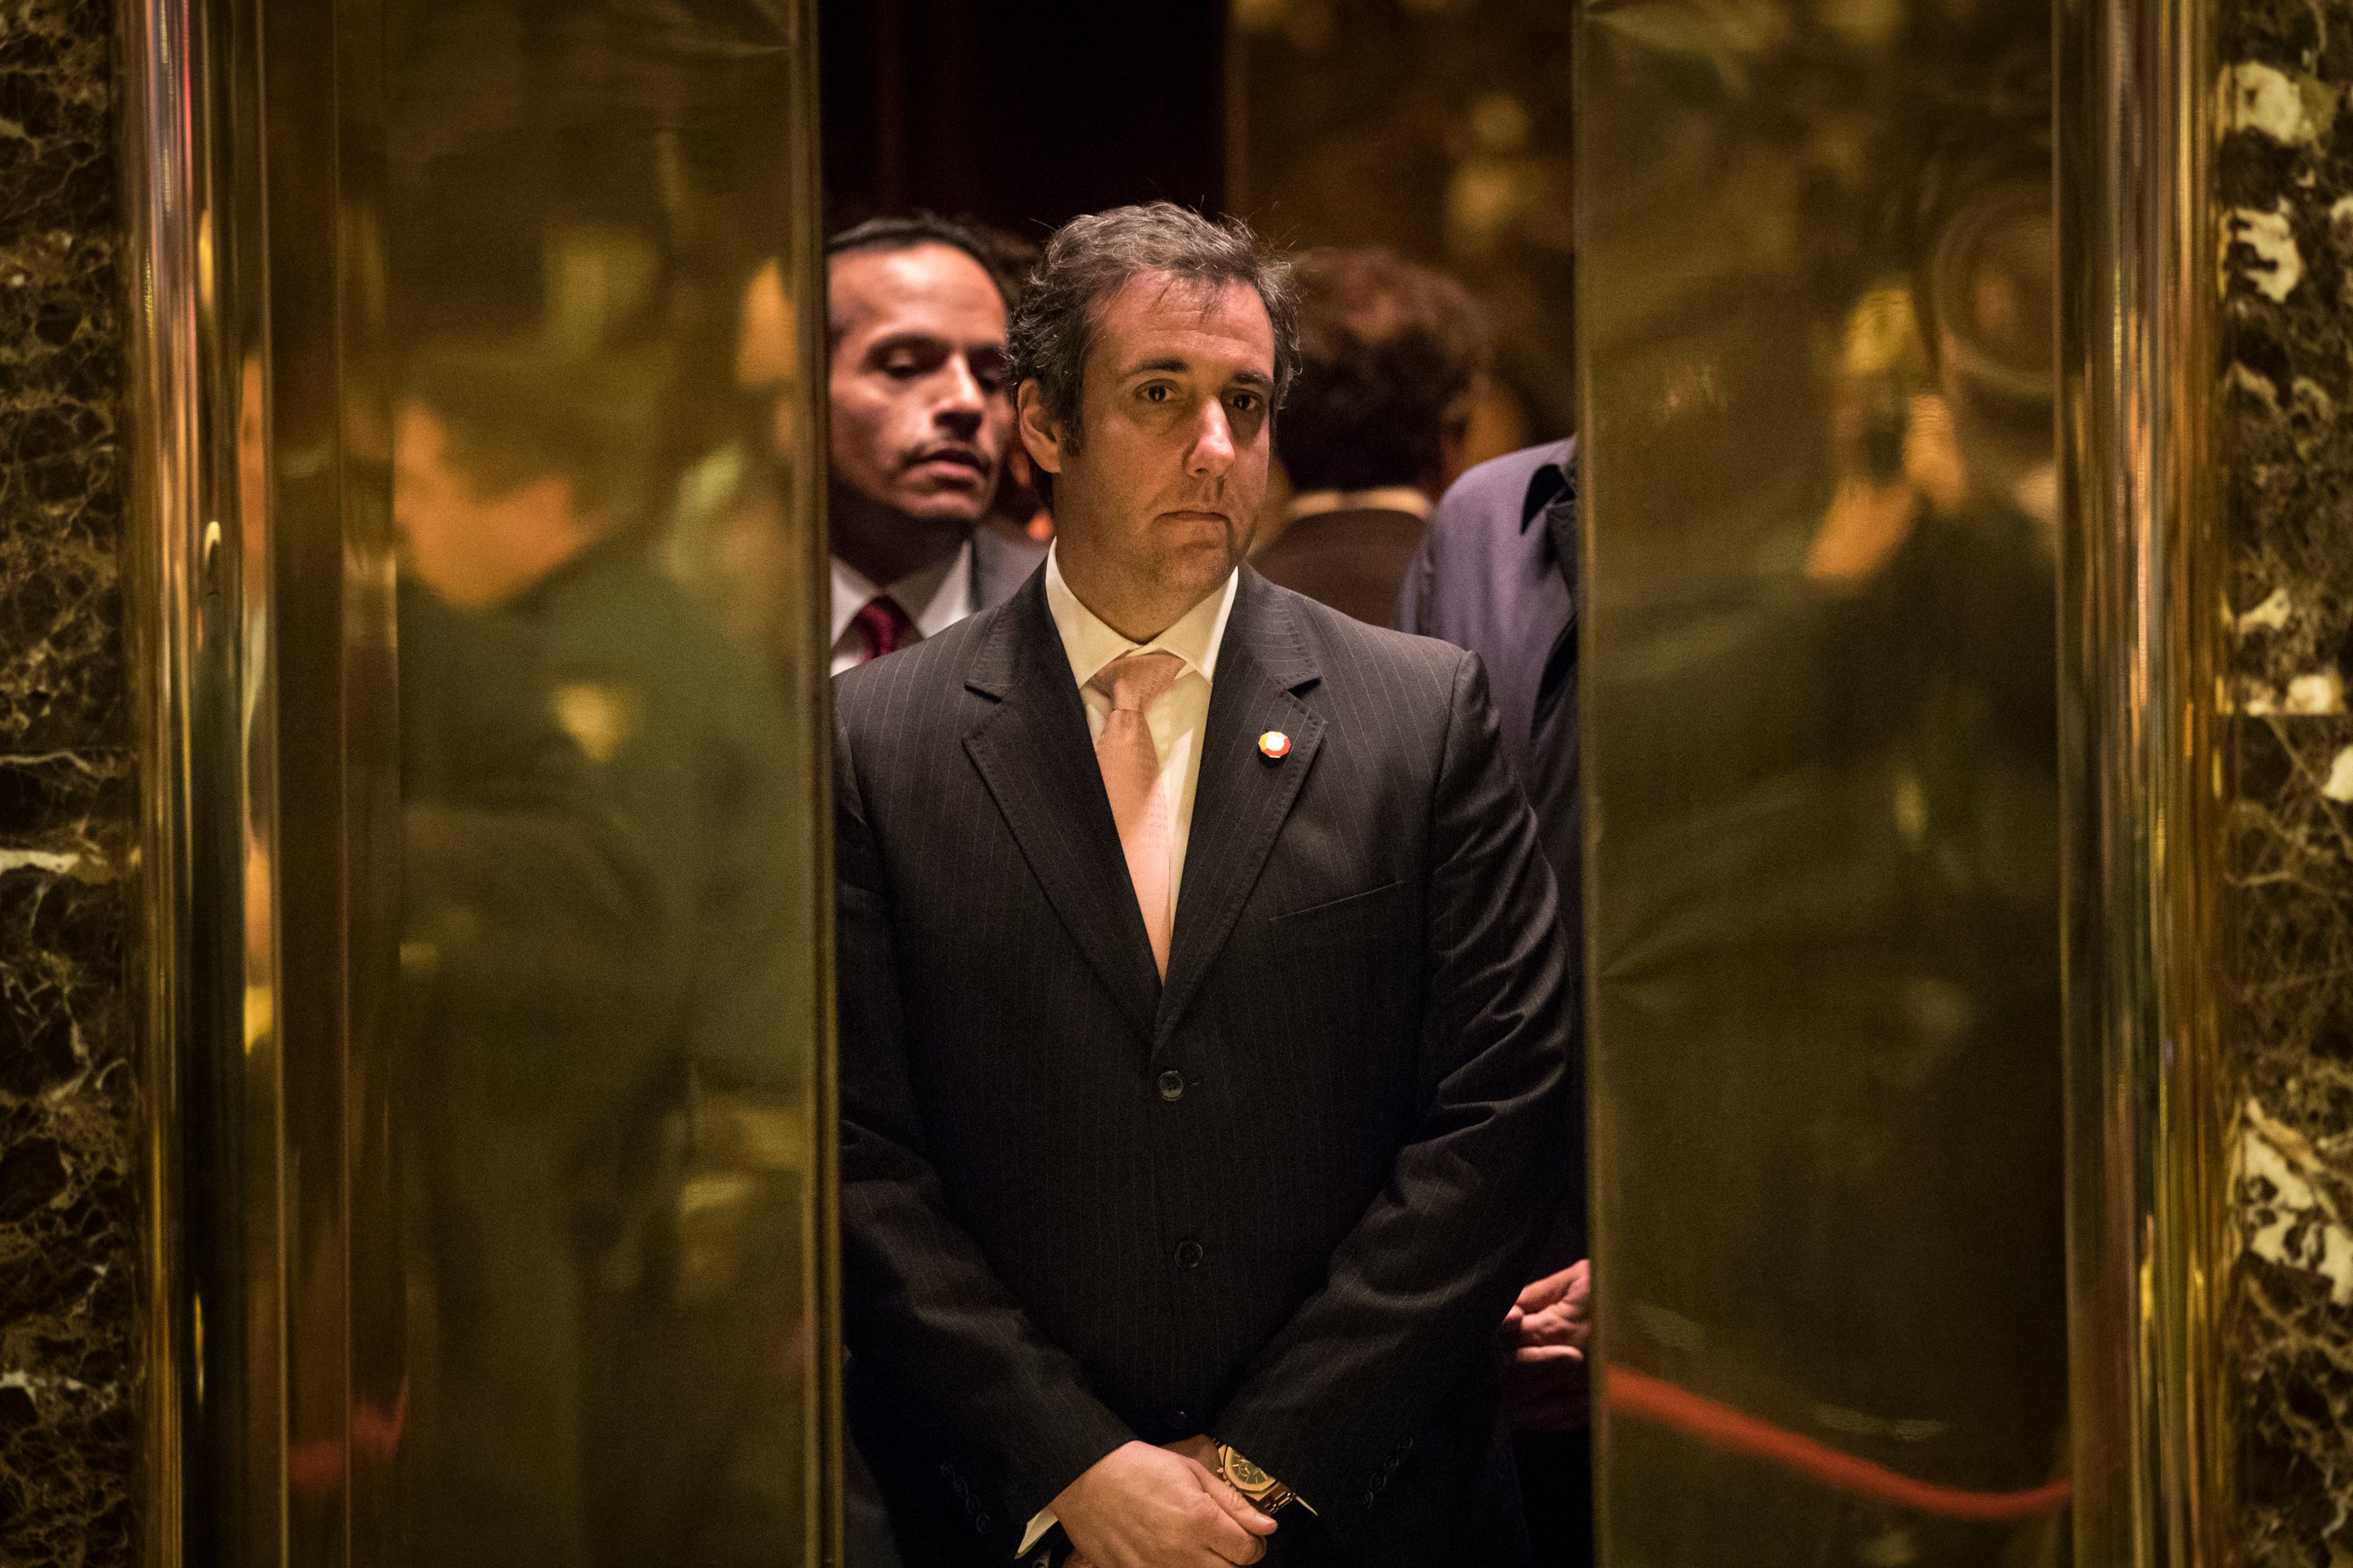 Michael Cohen, personal lawyer for President-elect Donald Trump, gets into an elevator at Trump Tower, Dec 12, 2016 in New York City. (Getty Images) (Drew Angerer&mdash;Getty Images)